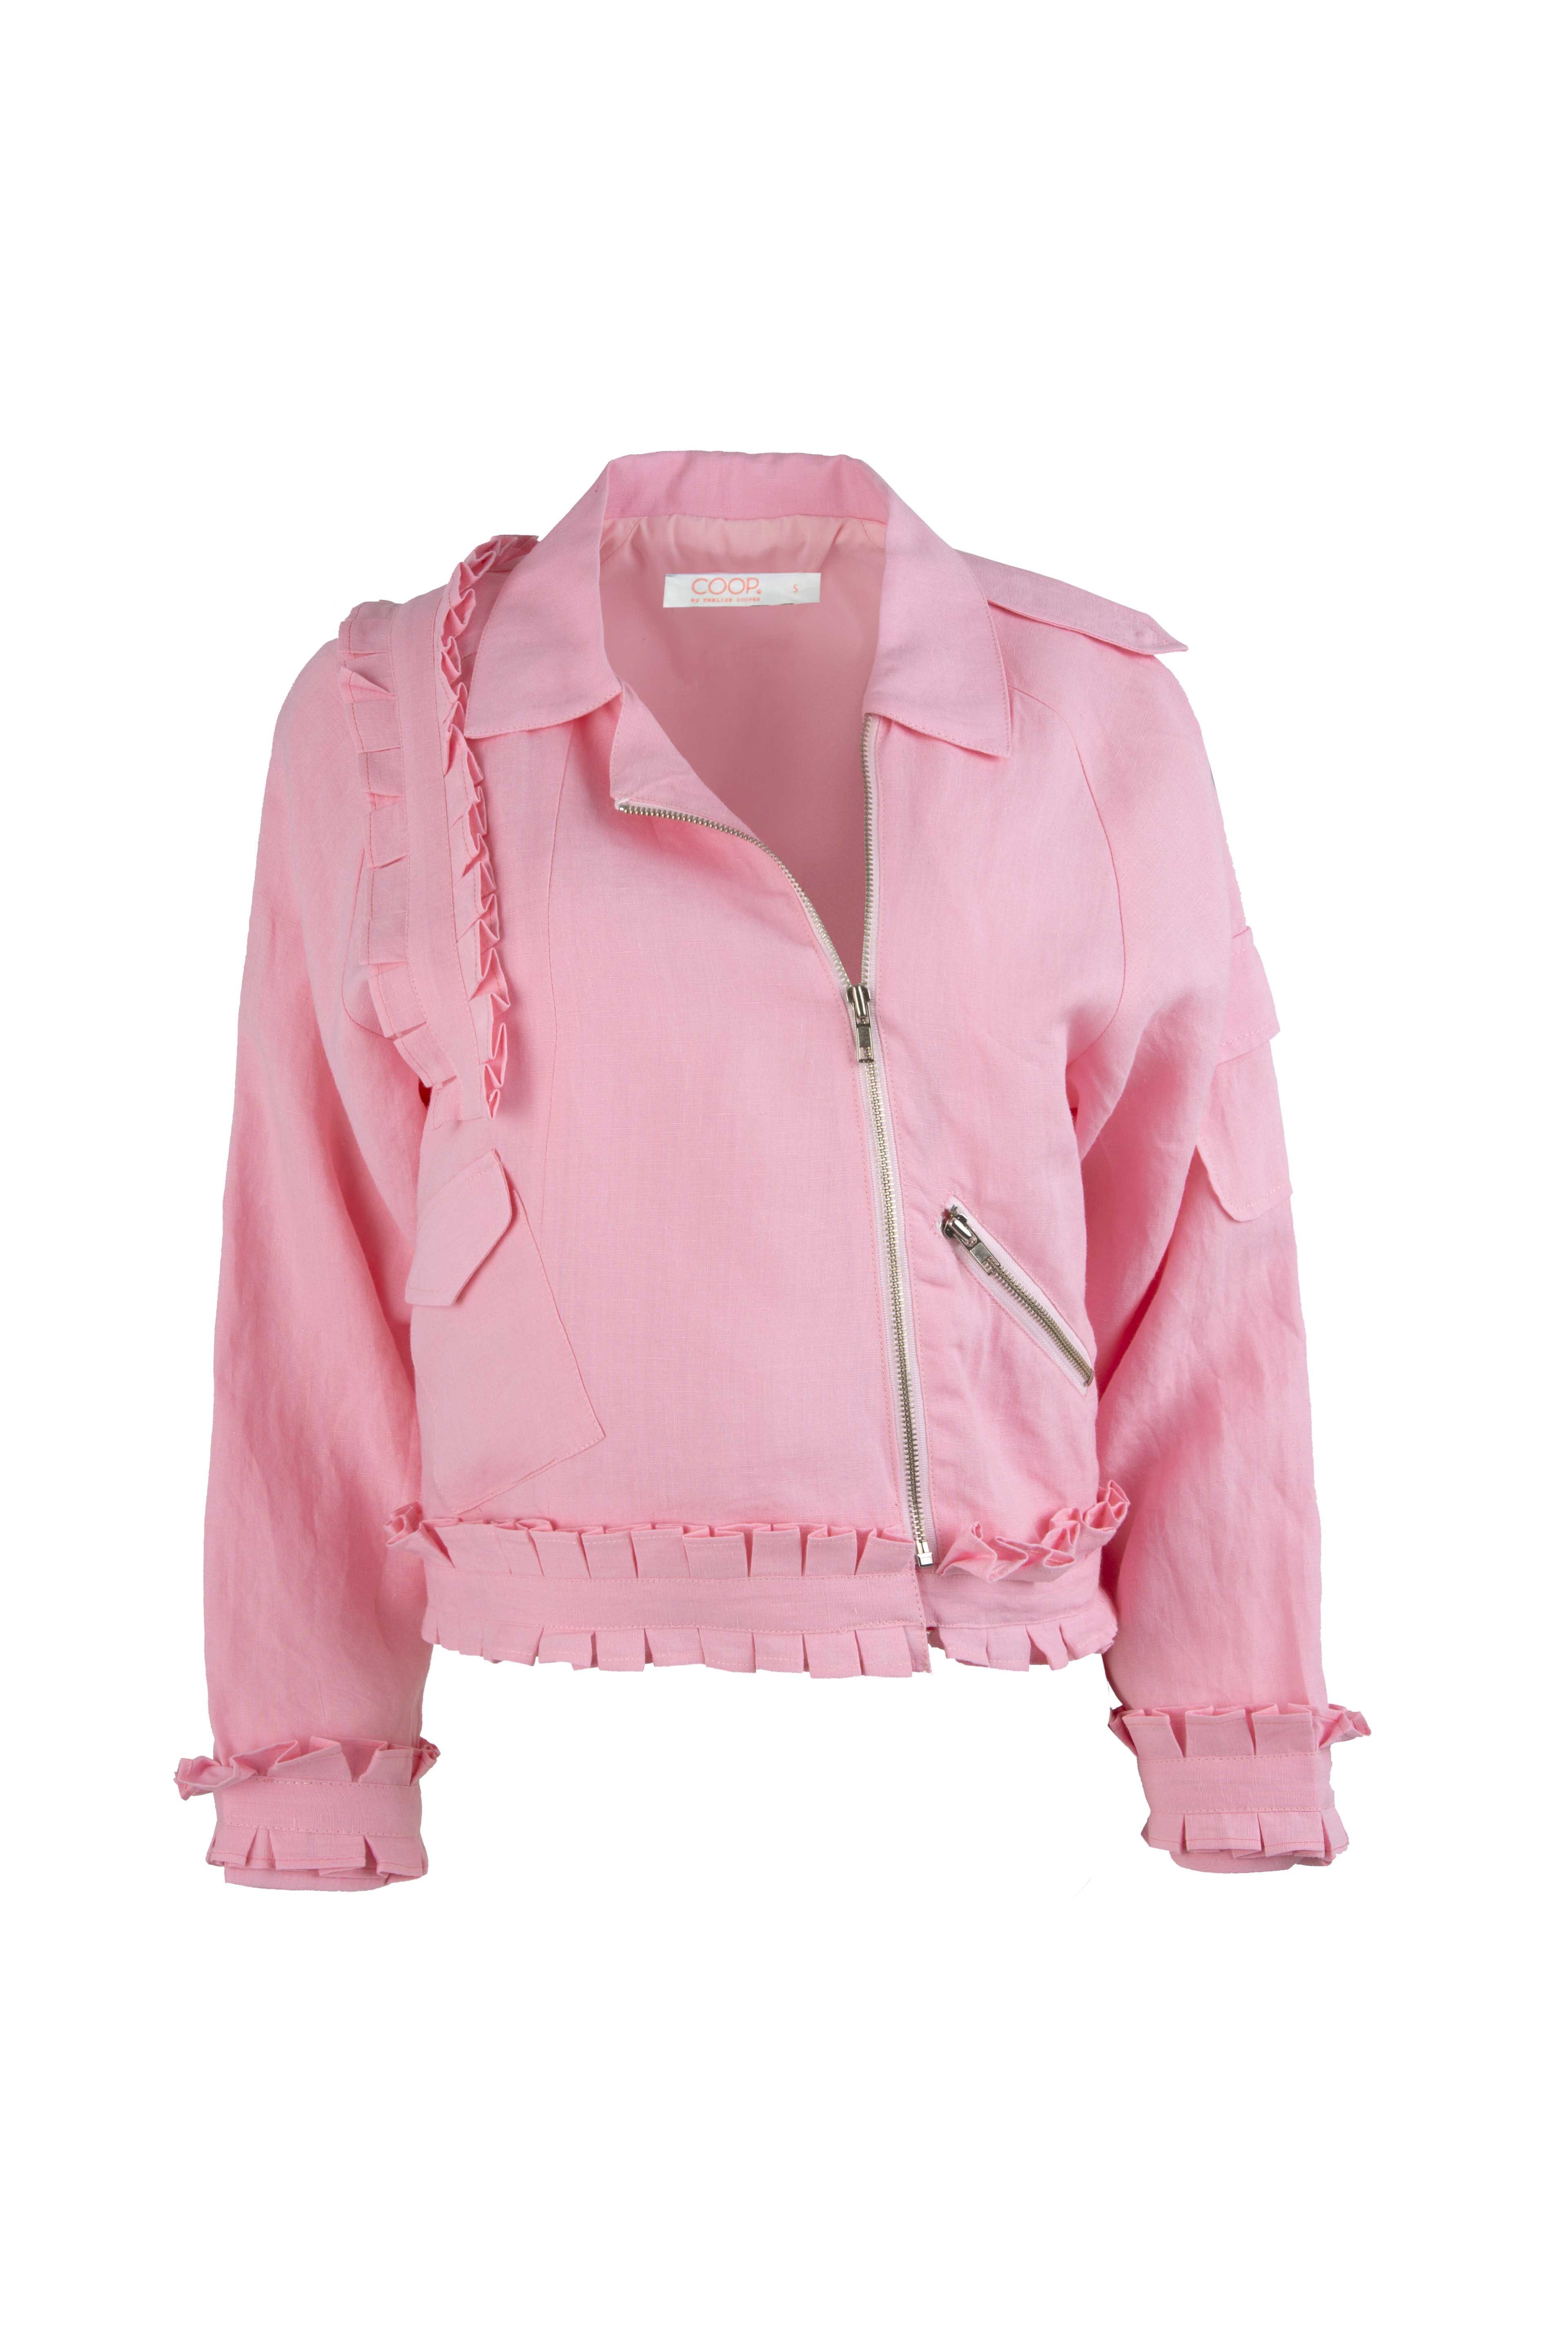 RUFF MY TUMBLE Jacket - The Outlet-Shop All : Trelise Cooper Online ...